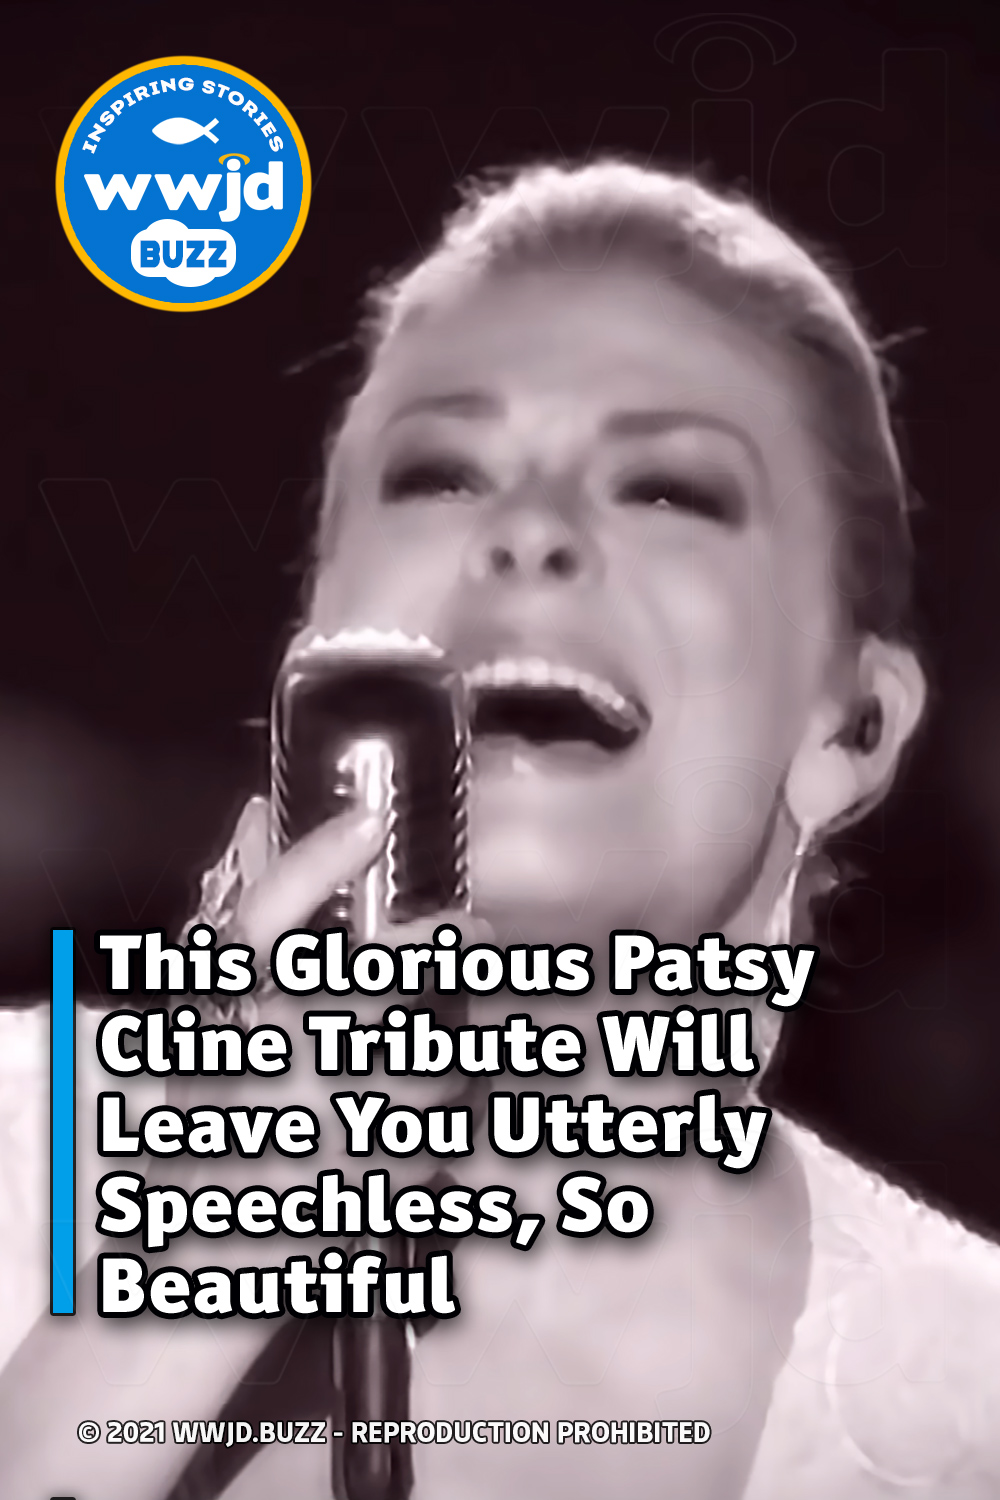 This Glorious Patsy Cline Tribute Will Leave You Utterly Speechless, So Beautiful